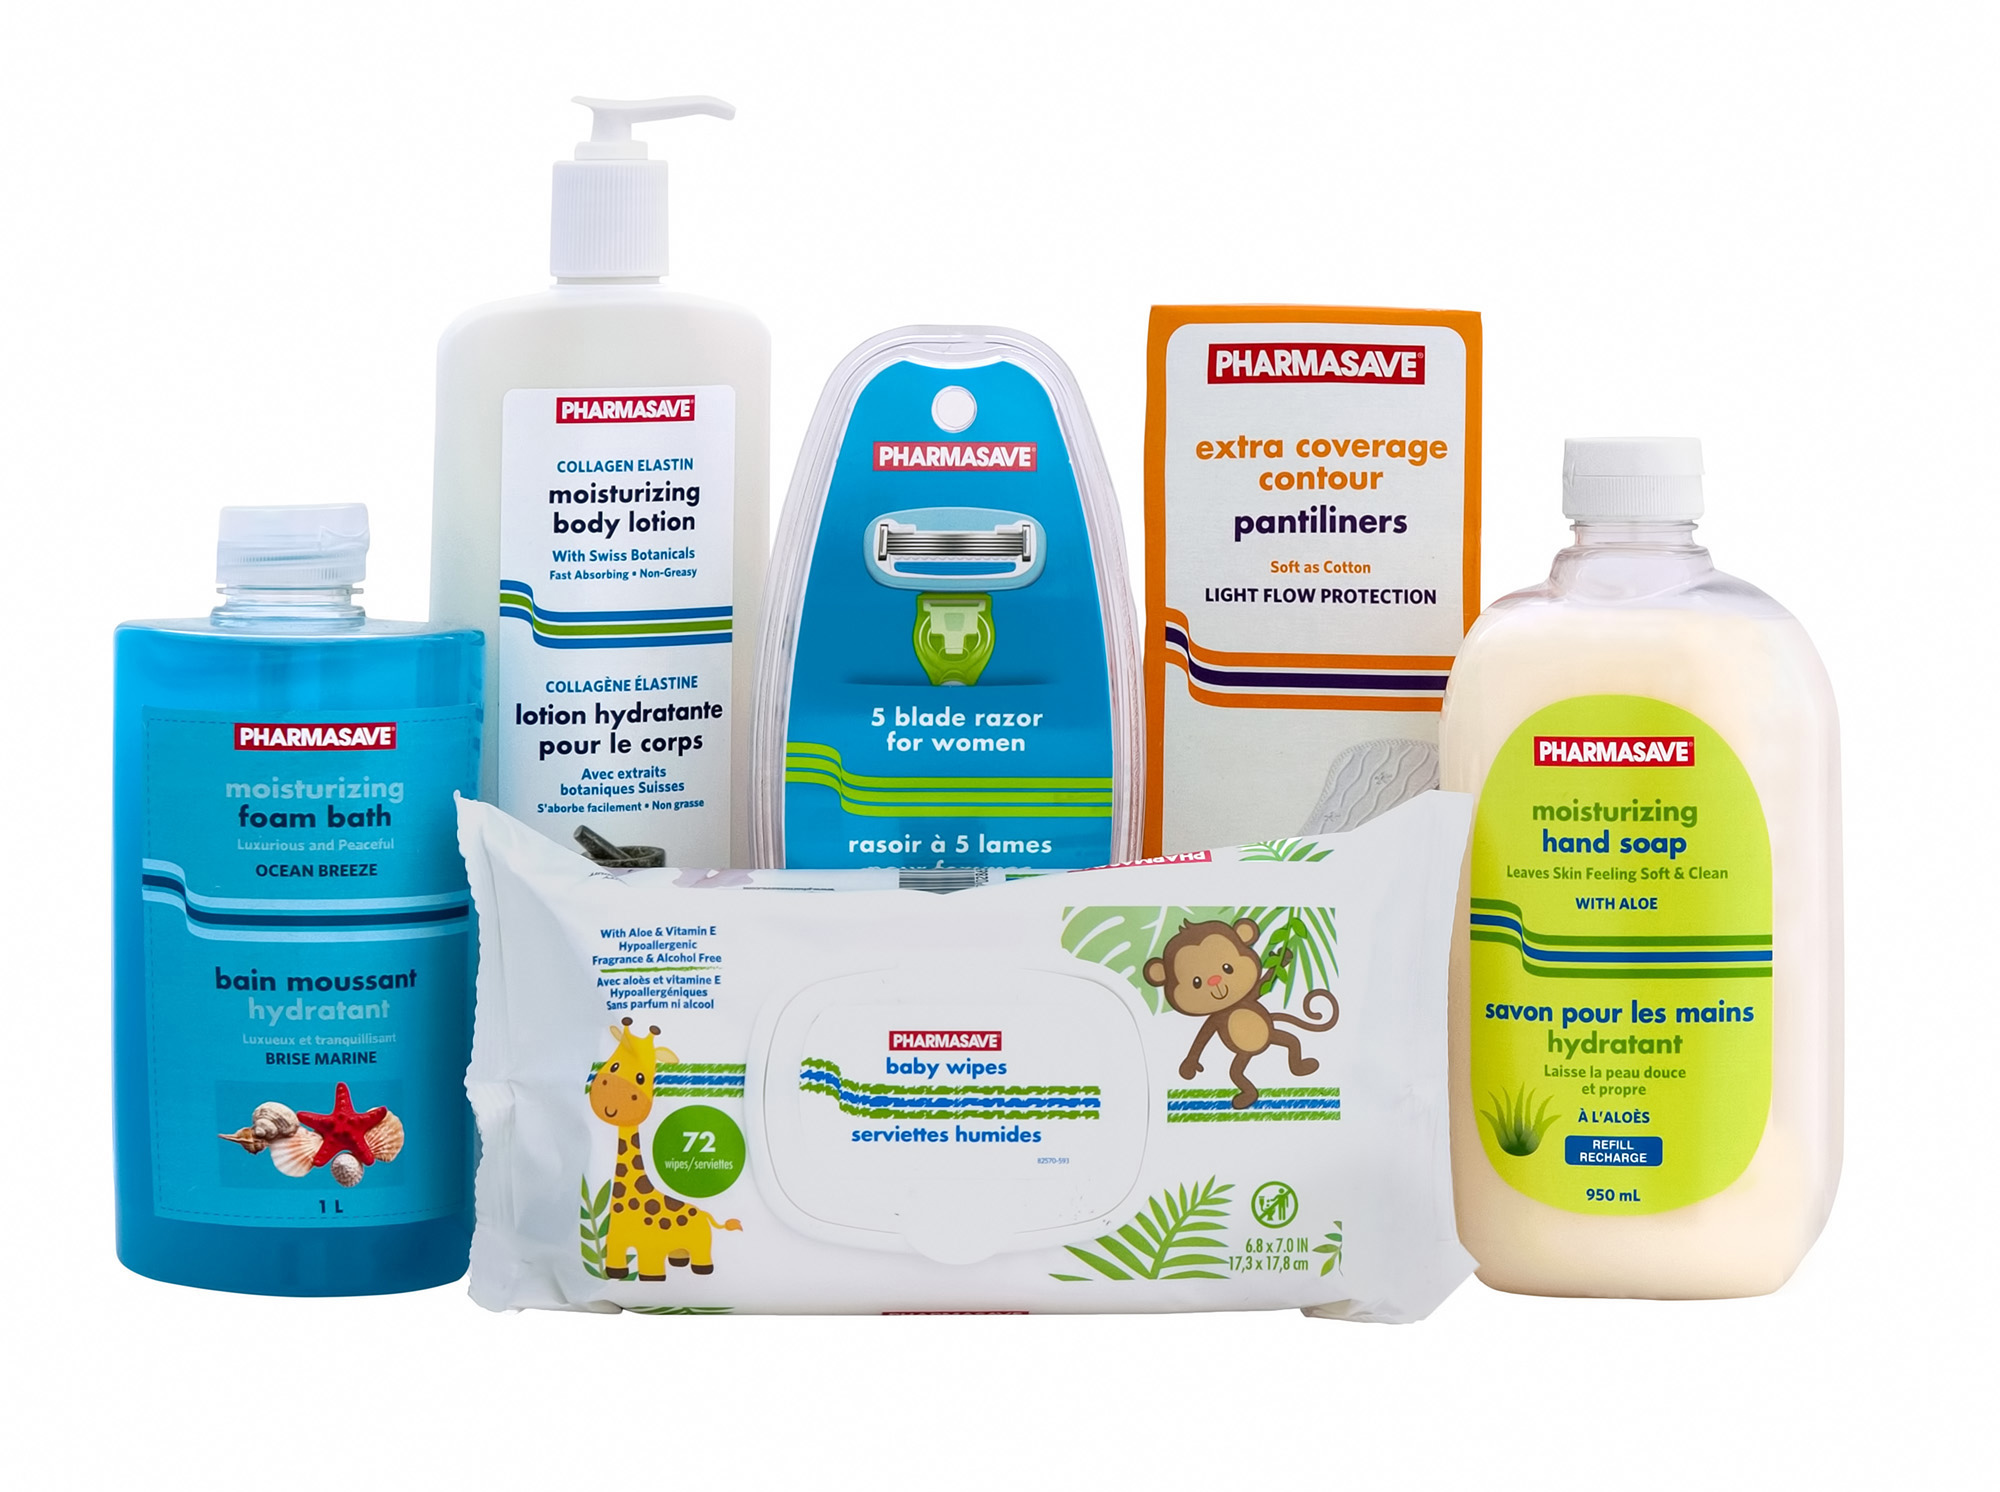 Pharmasave Brand personal care products.